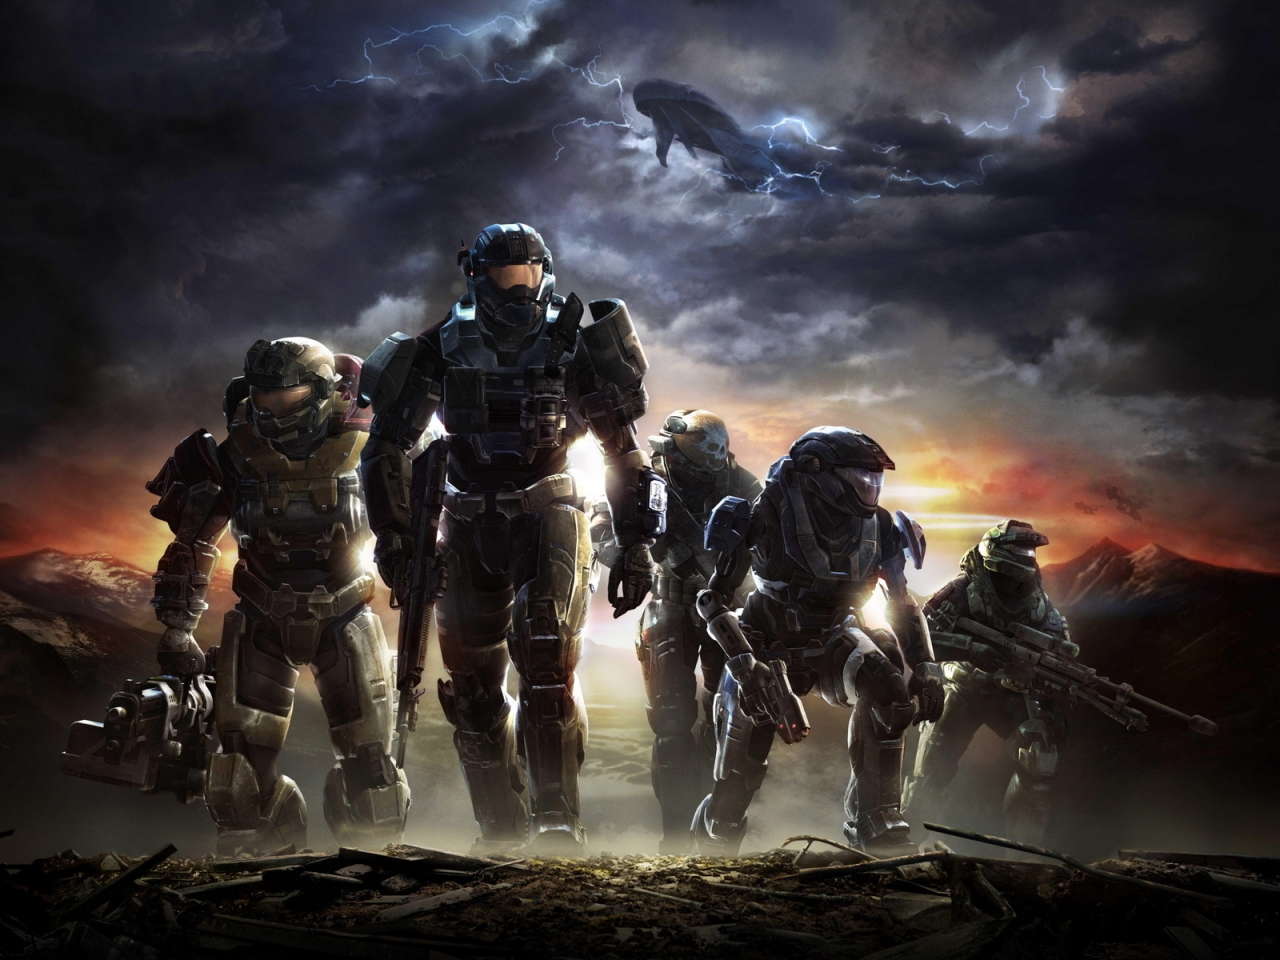 Halo Reach for 1280 x 960 resolution